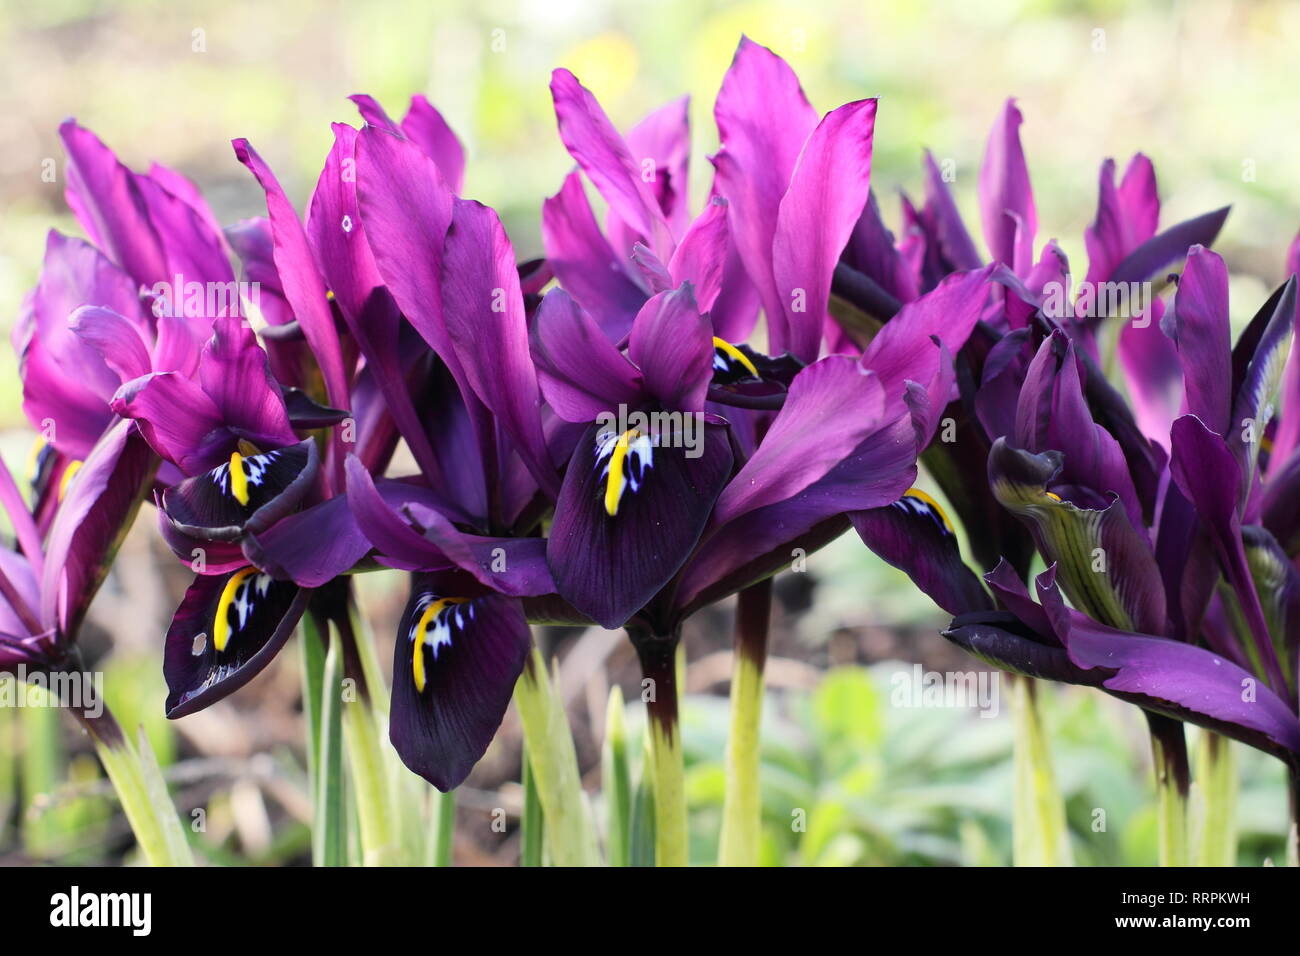 Iris histrioides 'George'. Early spring late winter flowers of Iris 'George' in an English garden, February, UK. Also called Iris reticulata' George'. Stock Photo